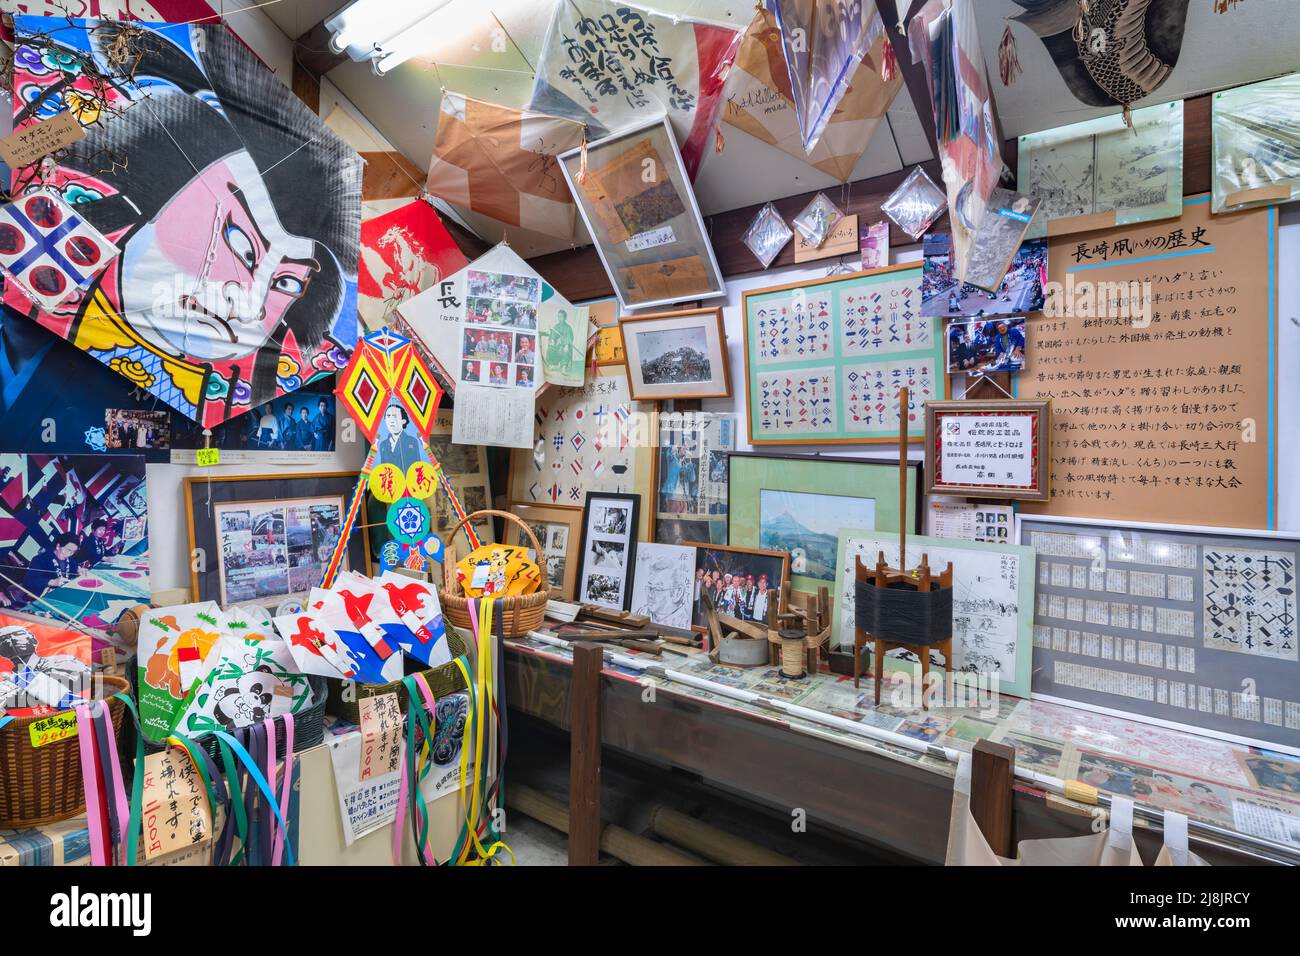 nagasaki, kyushu - december 14 2019: A lot of Japanese hata kite exhibited in the Ogawa Hataten store which is an handmade kite specialty shop in the Stock Photo